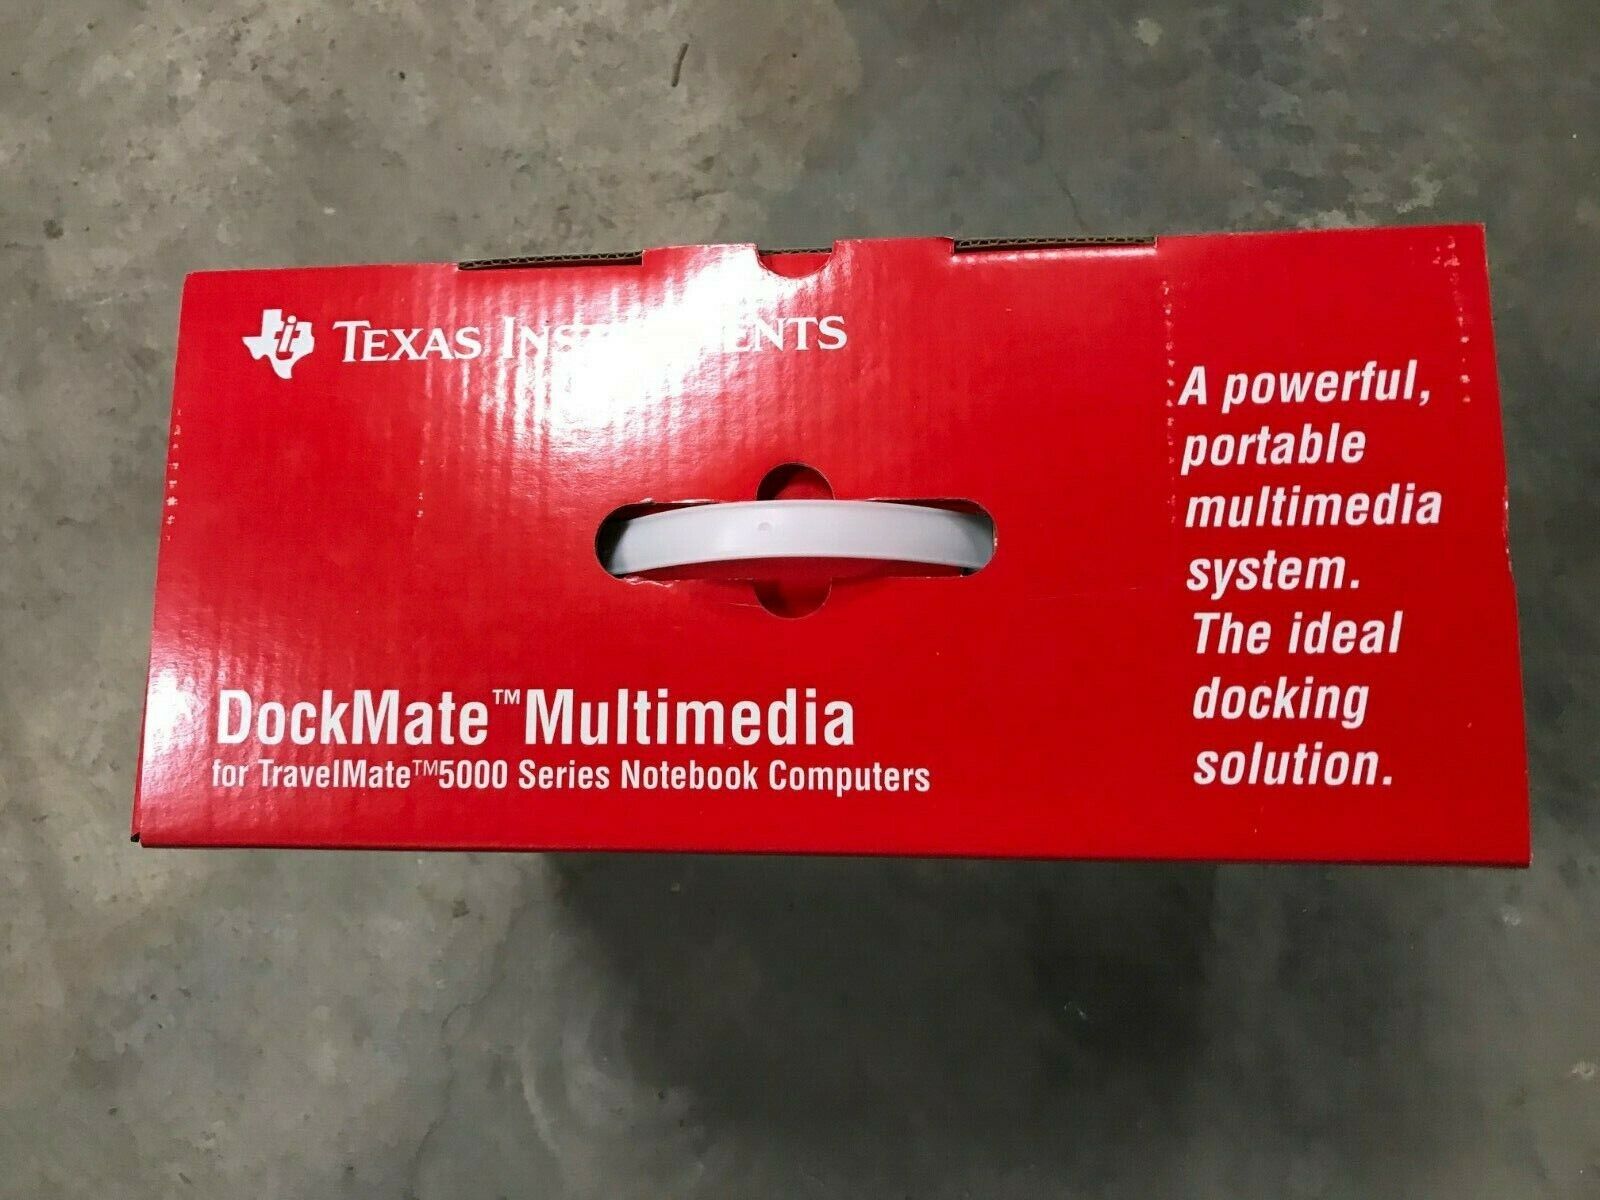 TEXAS INSTRUMENT ACER DOCKMATE MULTIMEDIA TRAVELMATE 5000 SERIES DOCKING STATION